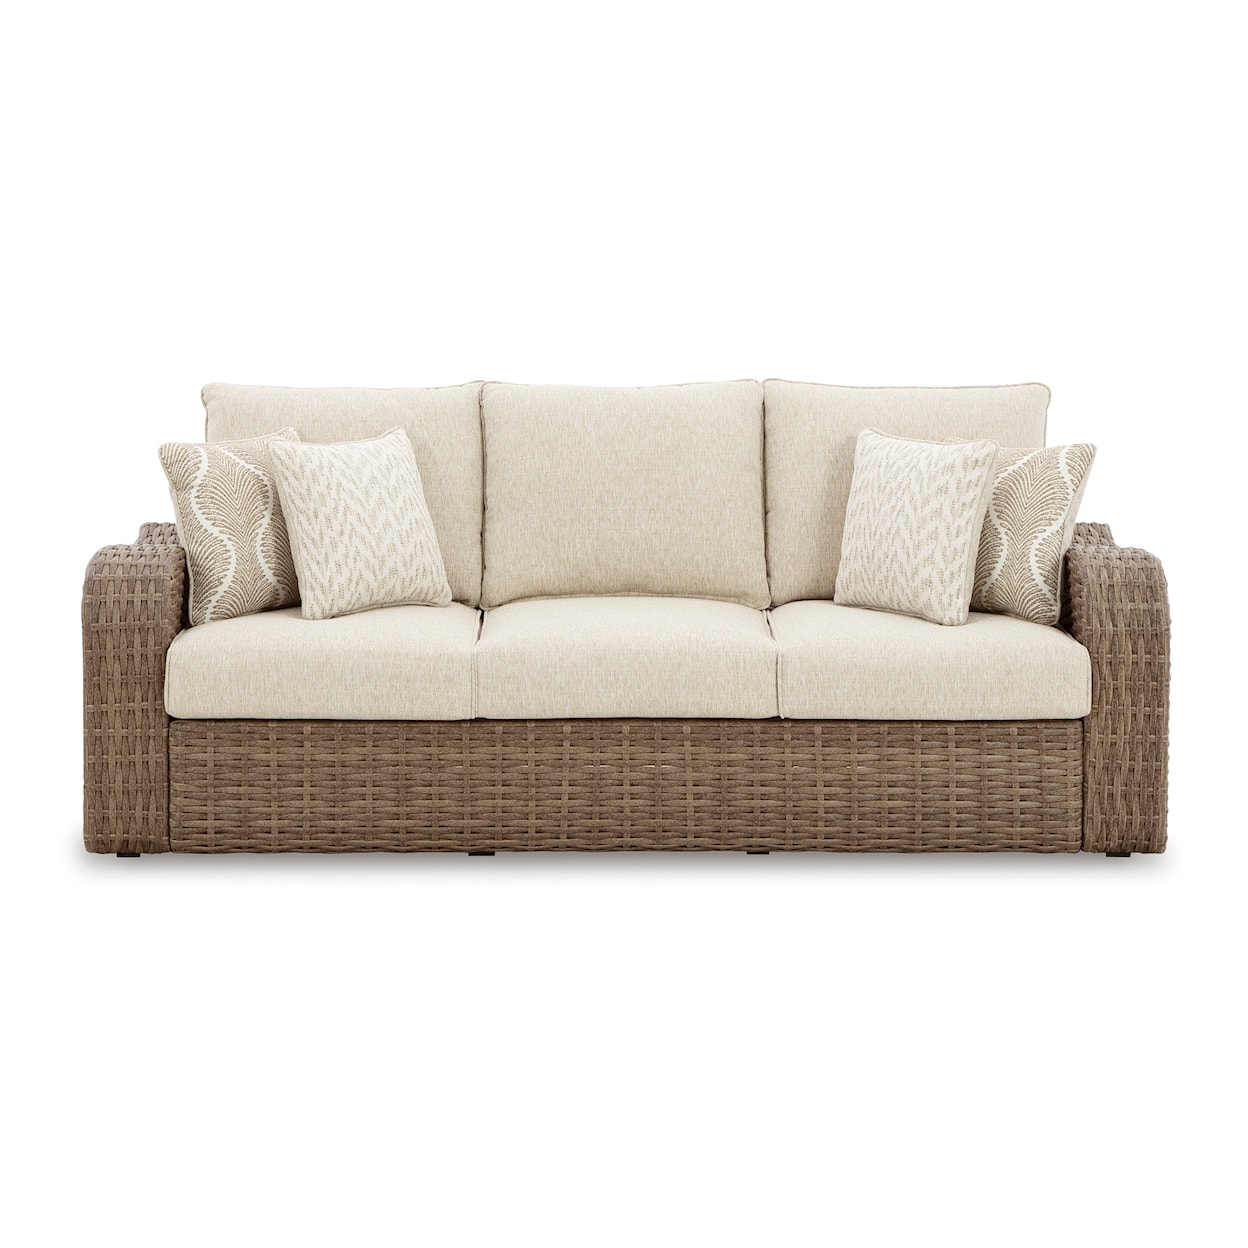 Signature Sandy Bloom Outdoor Sofa with Cushion